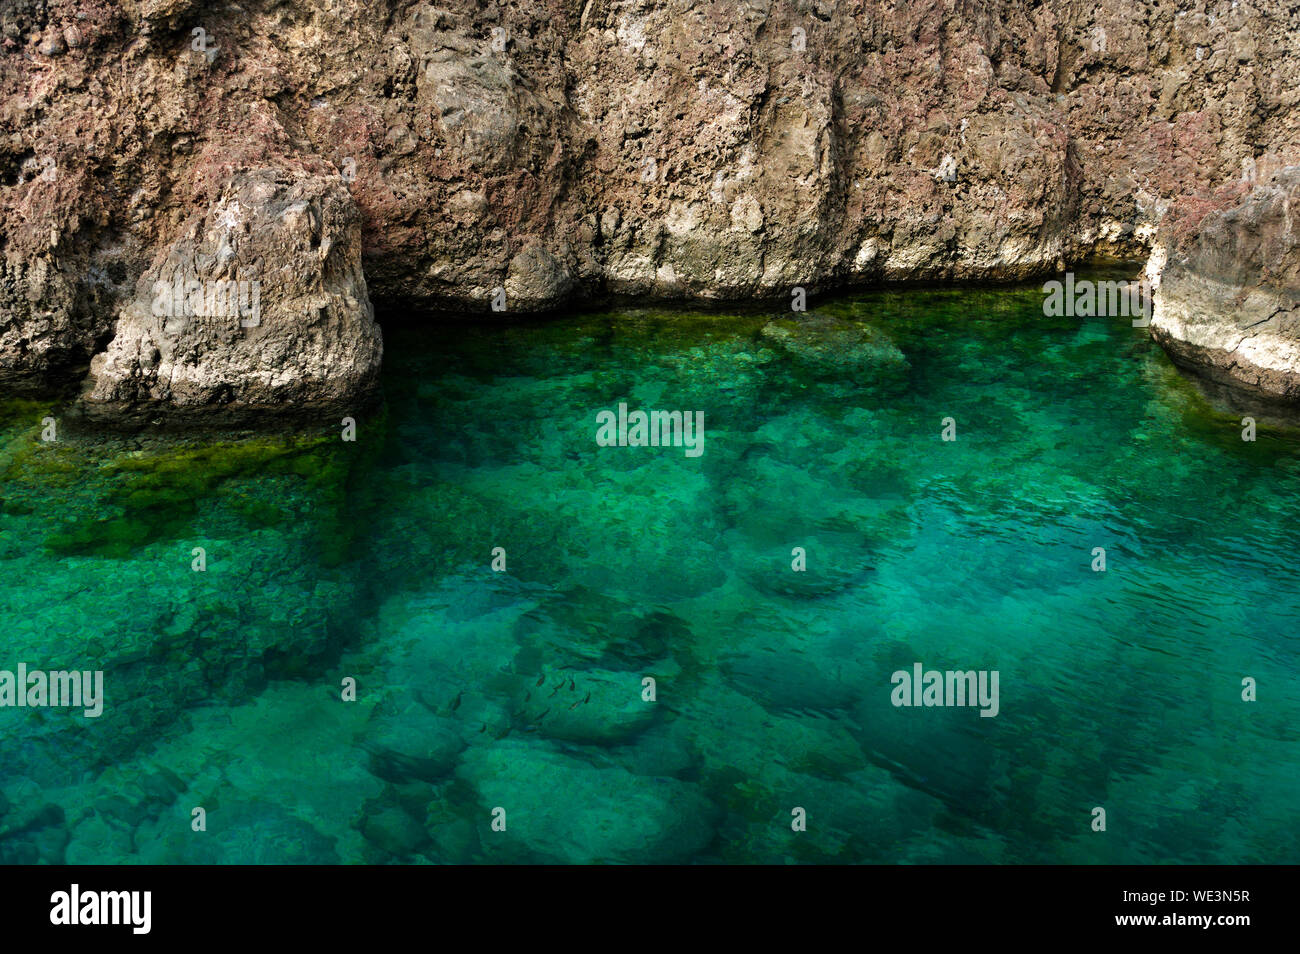 Shallow Water Against Rocks Stock Photo